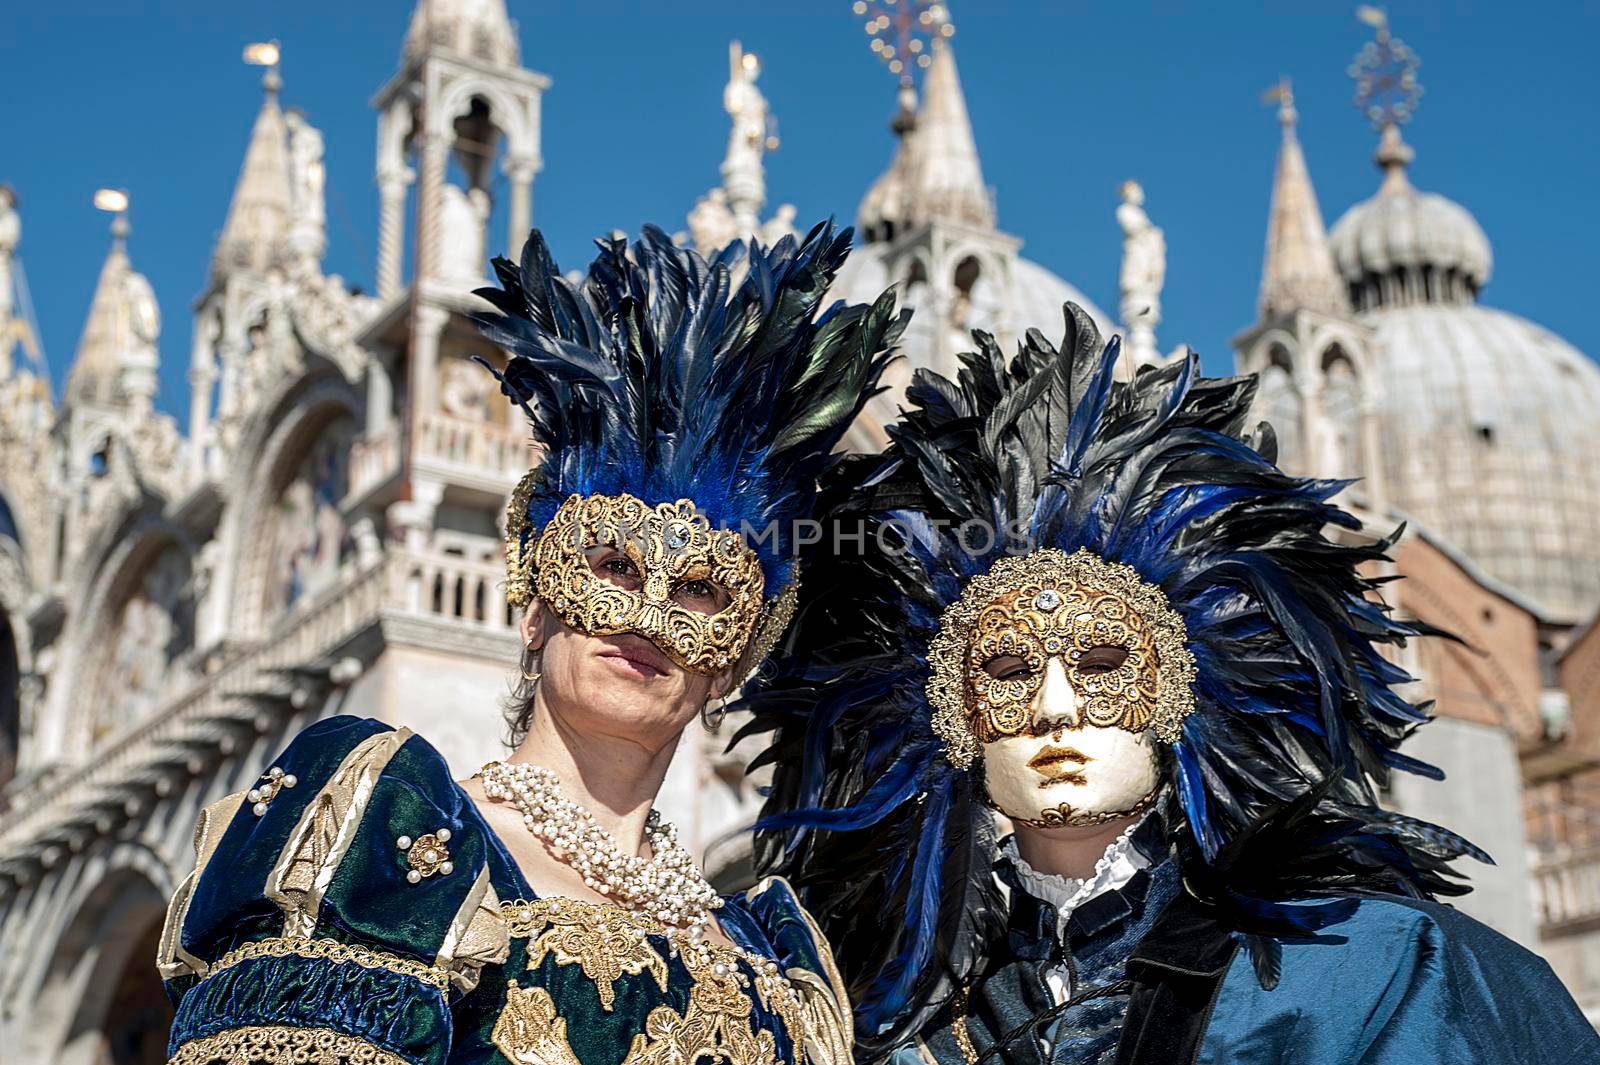 Venice carnival 2019 by Giamplume